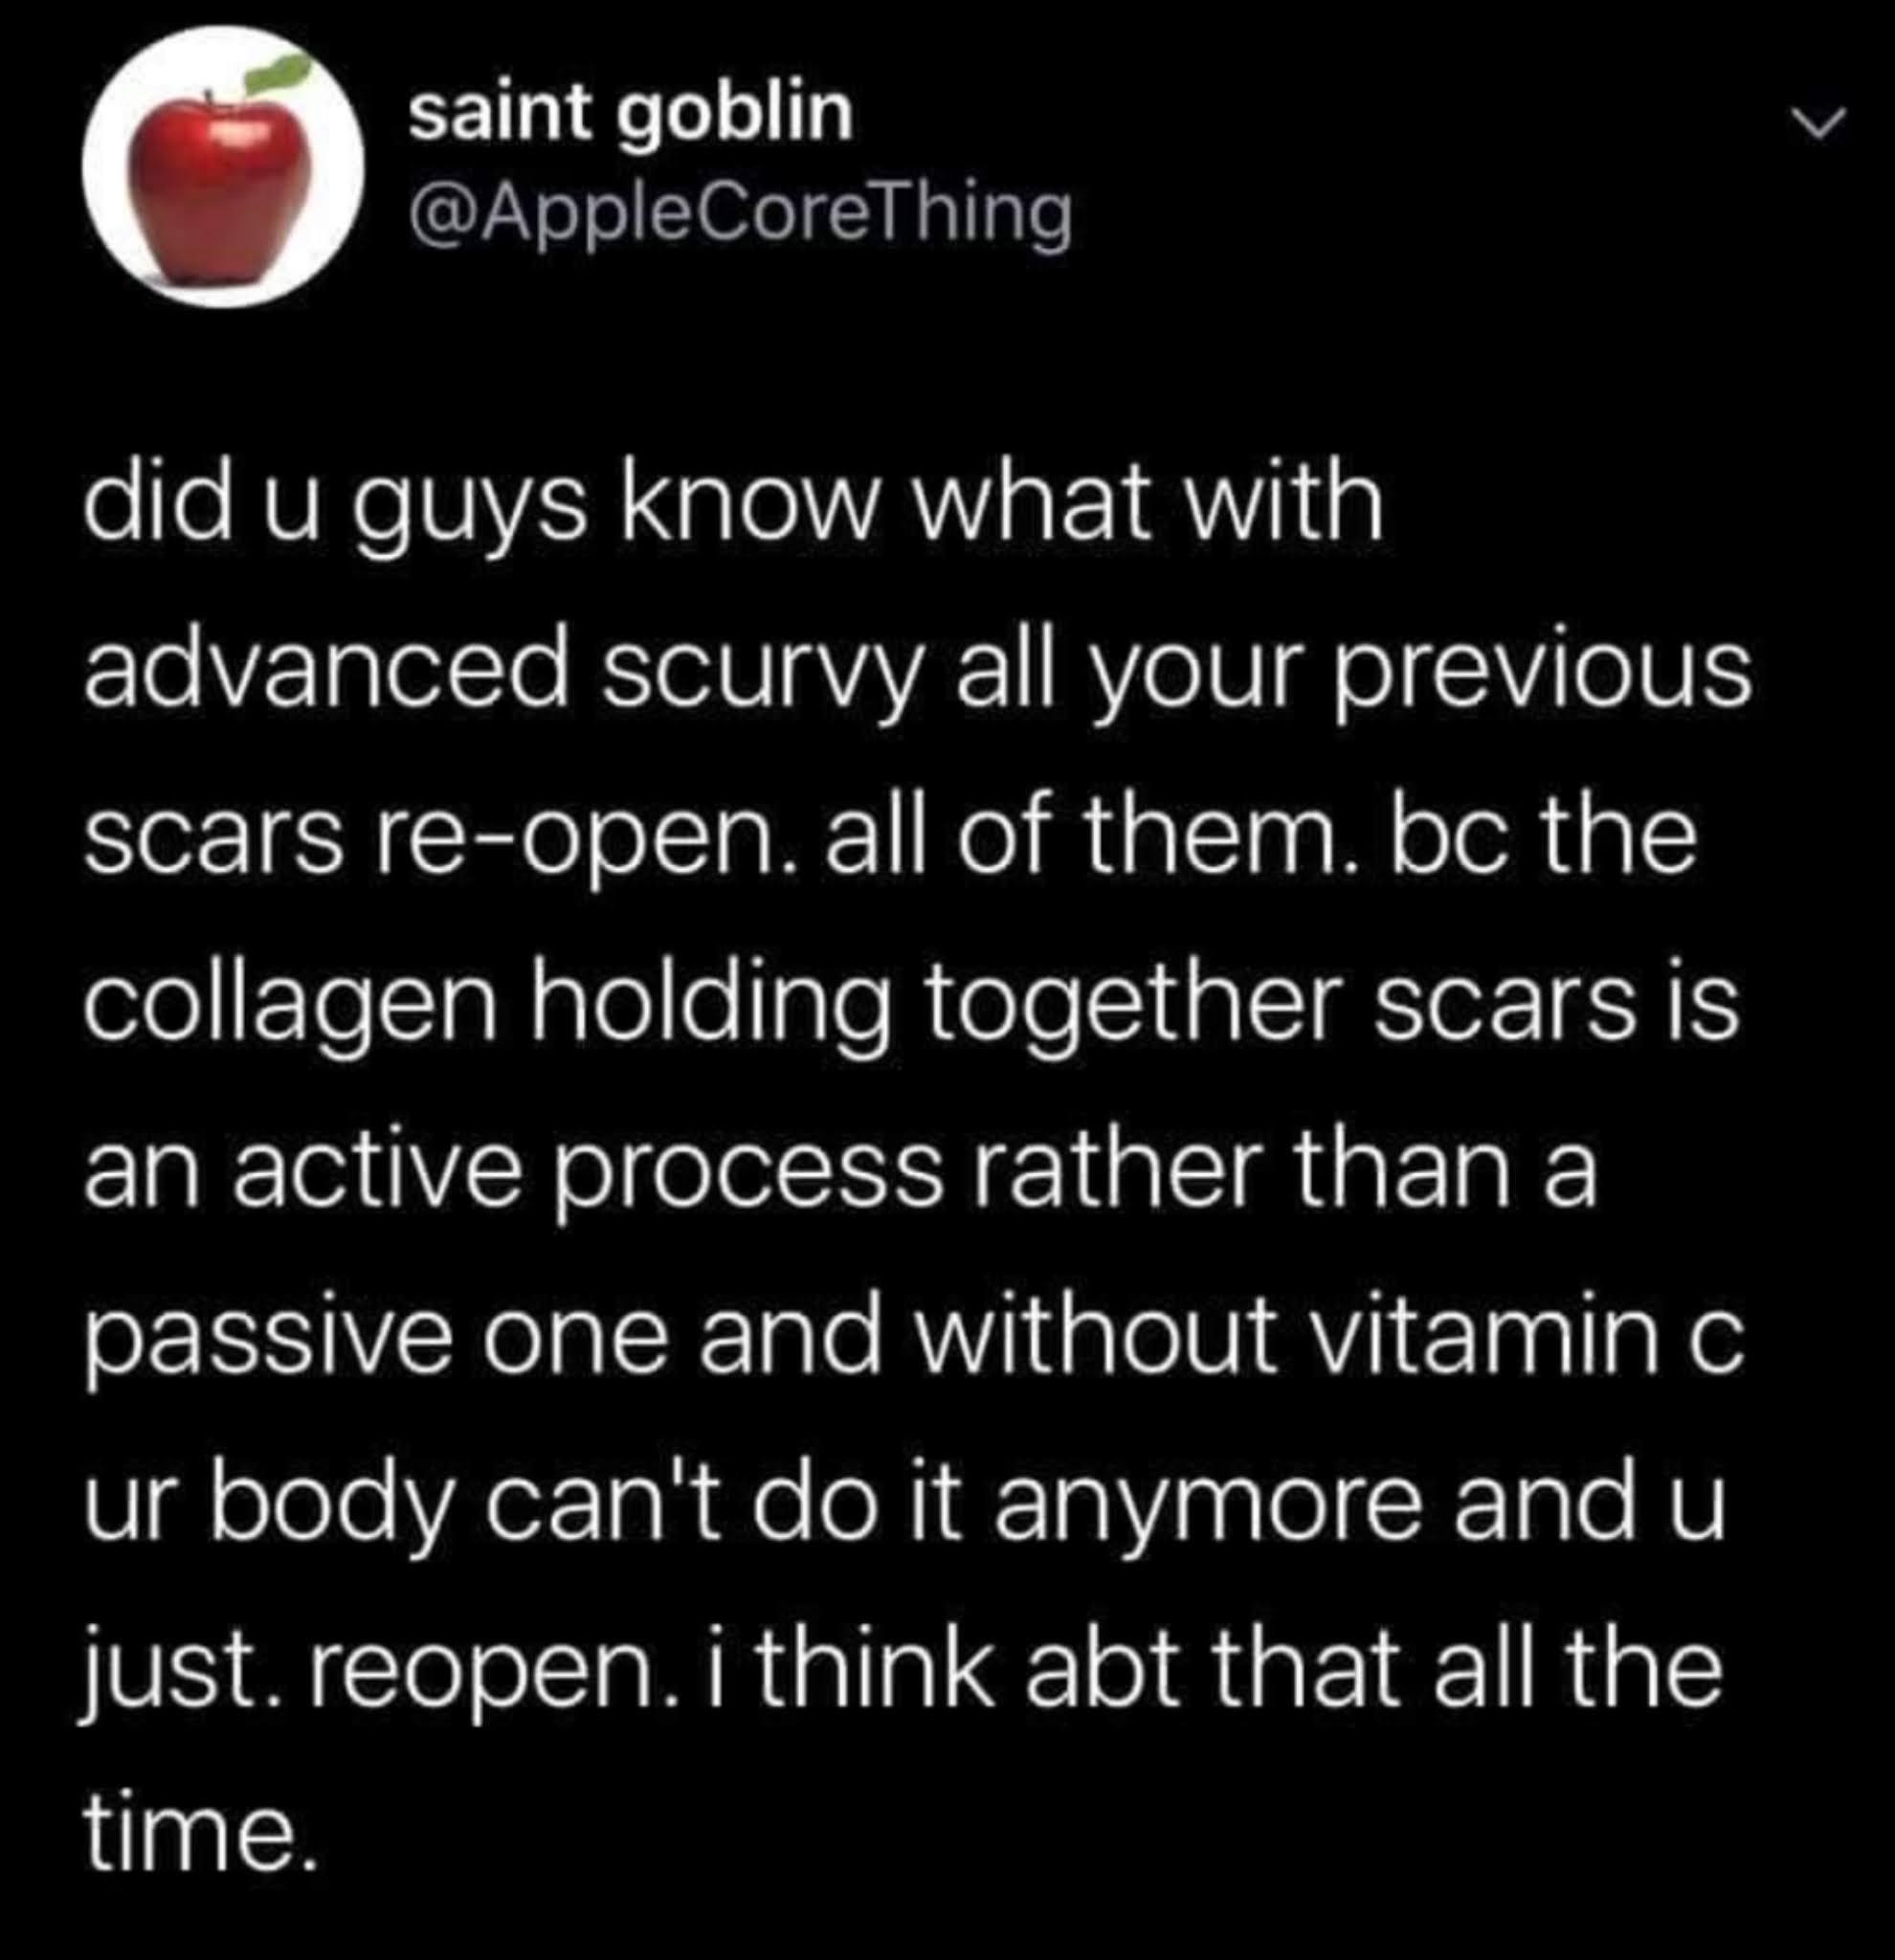 scurvy old wounds reopen - > saint goblin did u guys know what with advanced scurvy all your previous scars reopen. all of them. bc the collagen holding together scars is an active process rather than a passive one and without vitamin c ur body can't do i